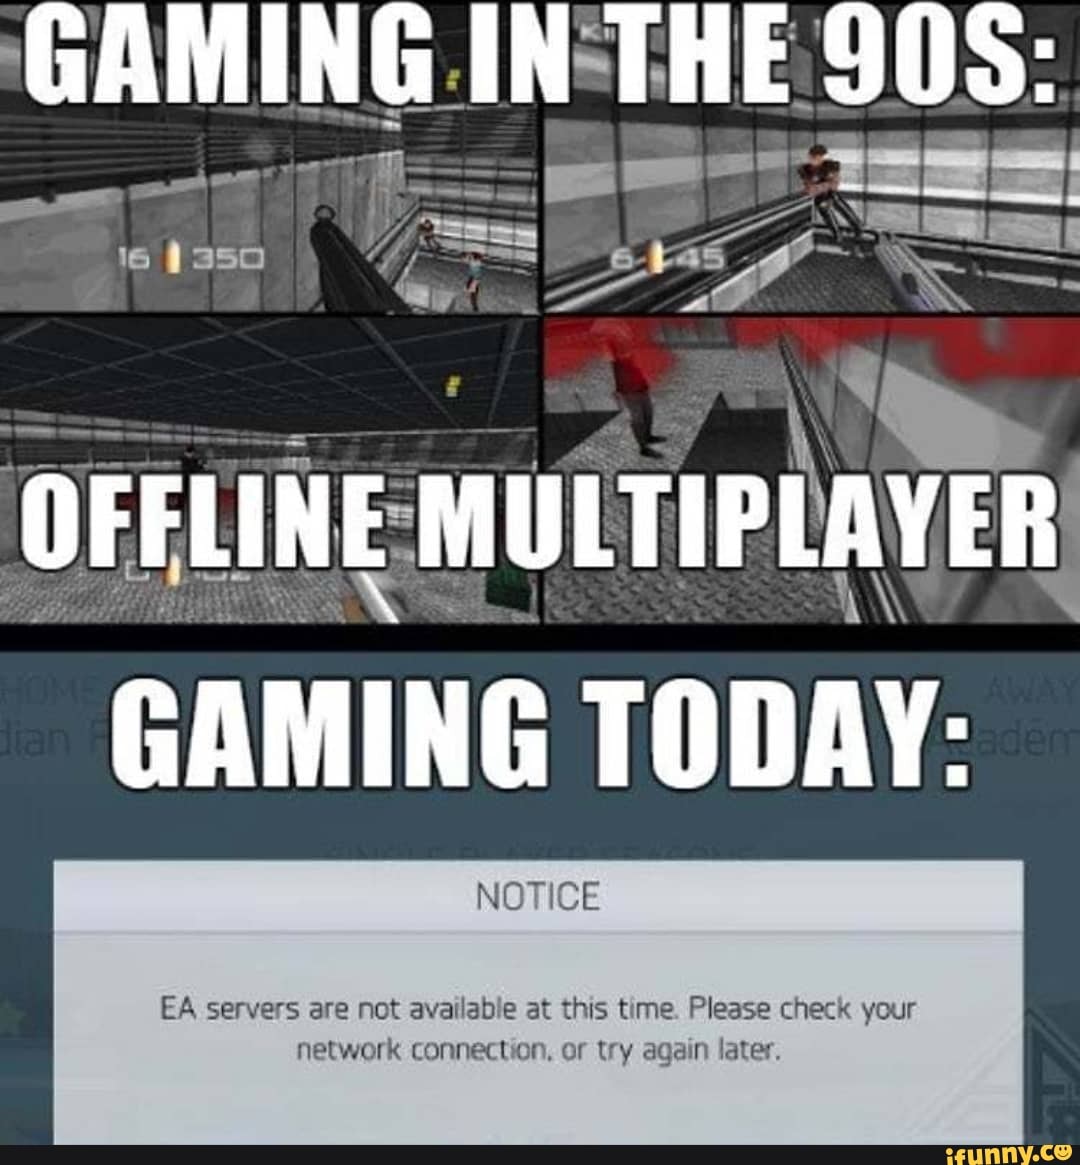 Offline multiplayer. Игра try again. Singleplayer Multiplayer Мем. Please check your Network connection and try again. Multiplayer offline games photo.